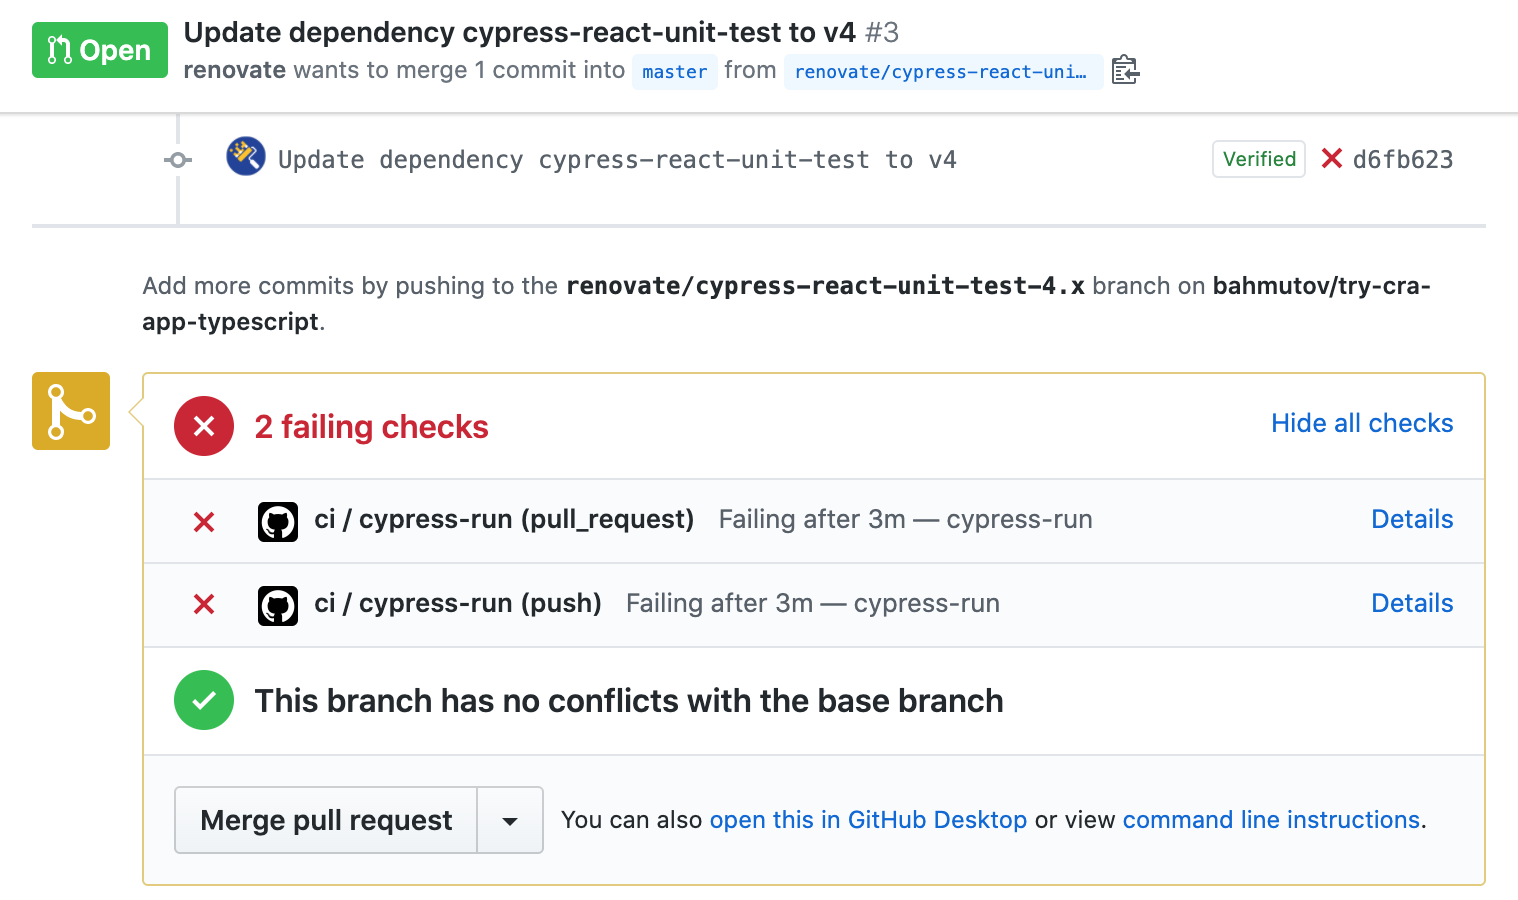 Failed pull request to update cypress-react-unit-test